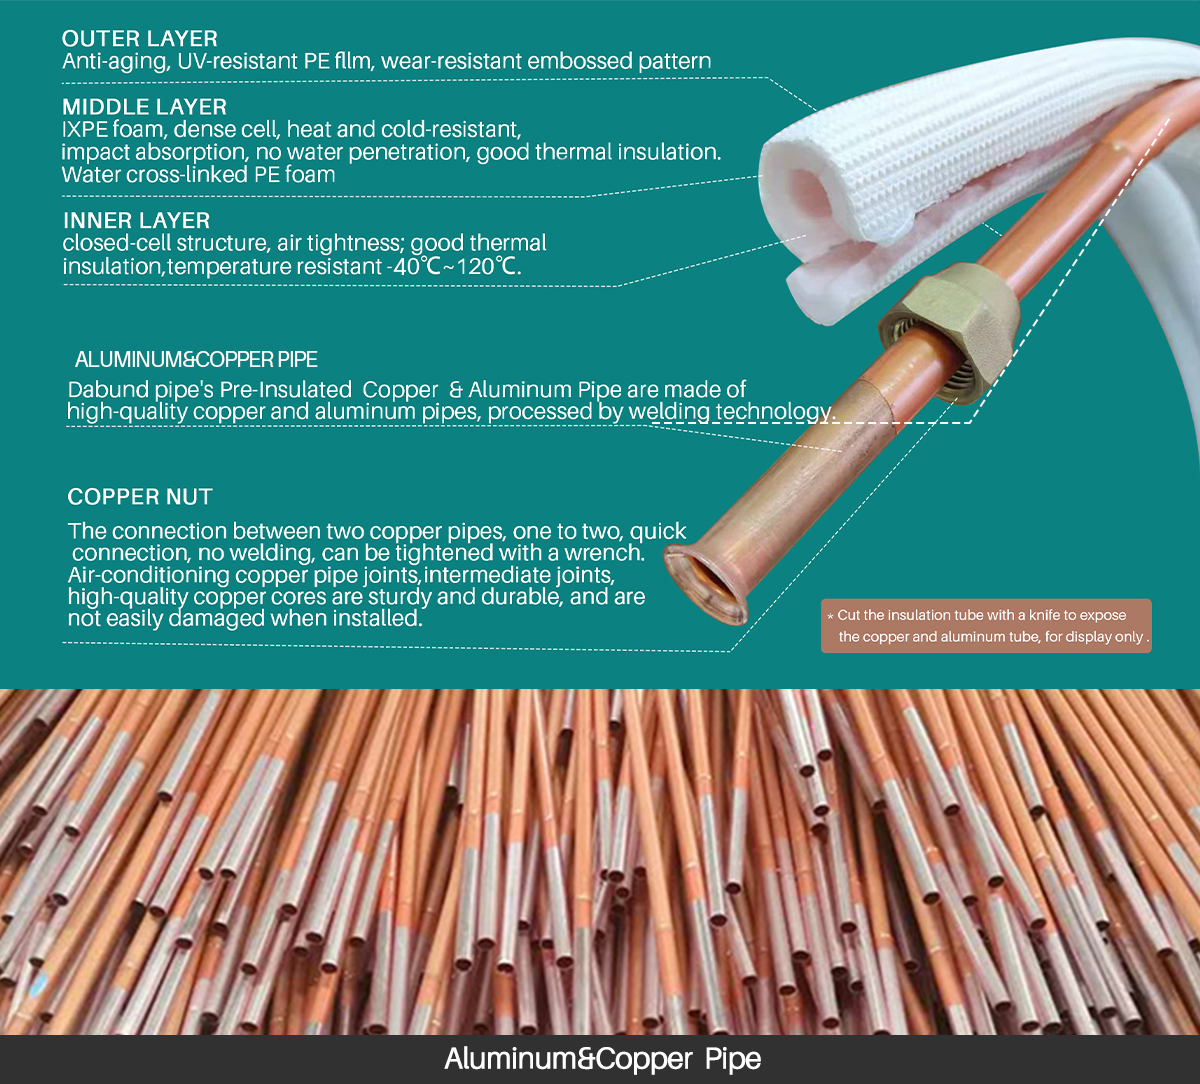 Whiet PE insulated copper and aluminum pipe